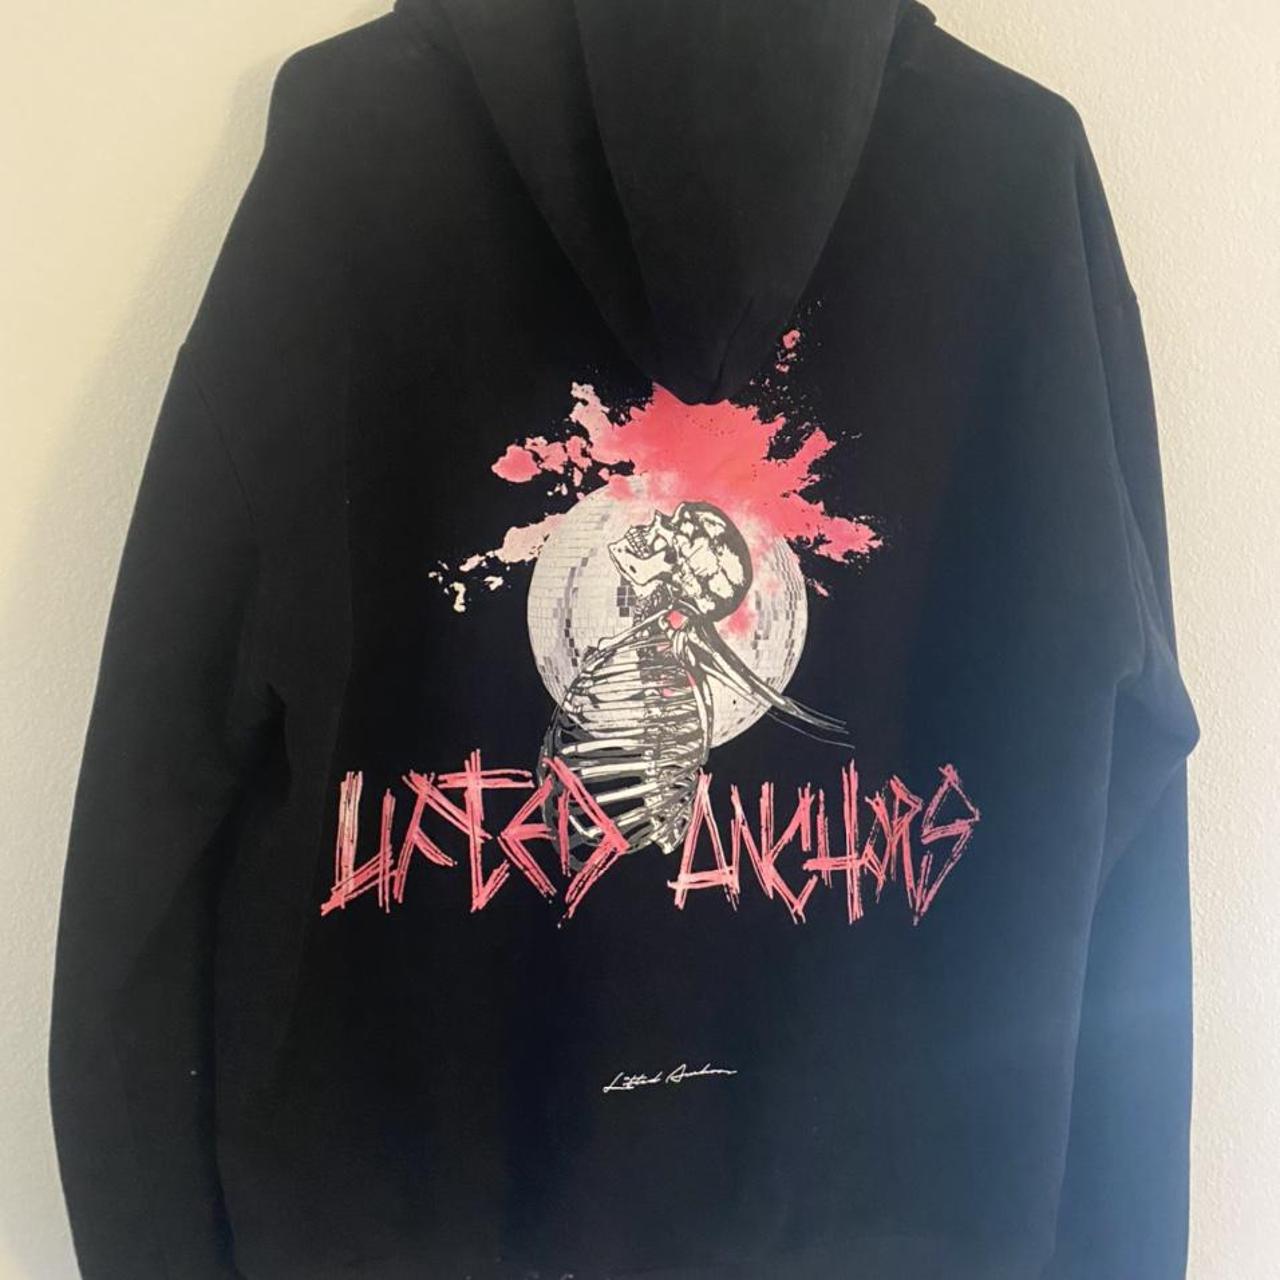 Product Image 2 - Lifted Anchors Graphic Hoodie
Size L
100%